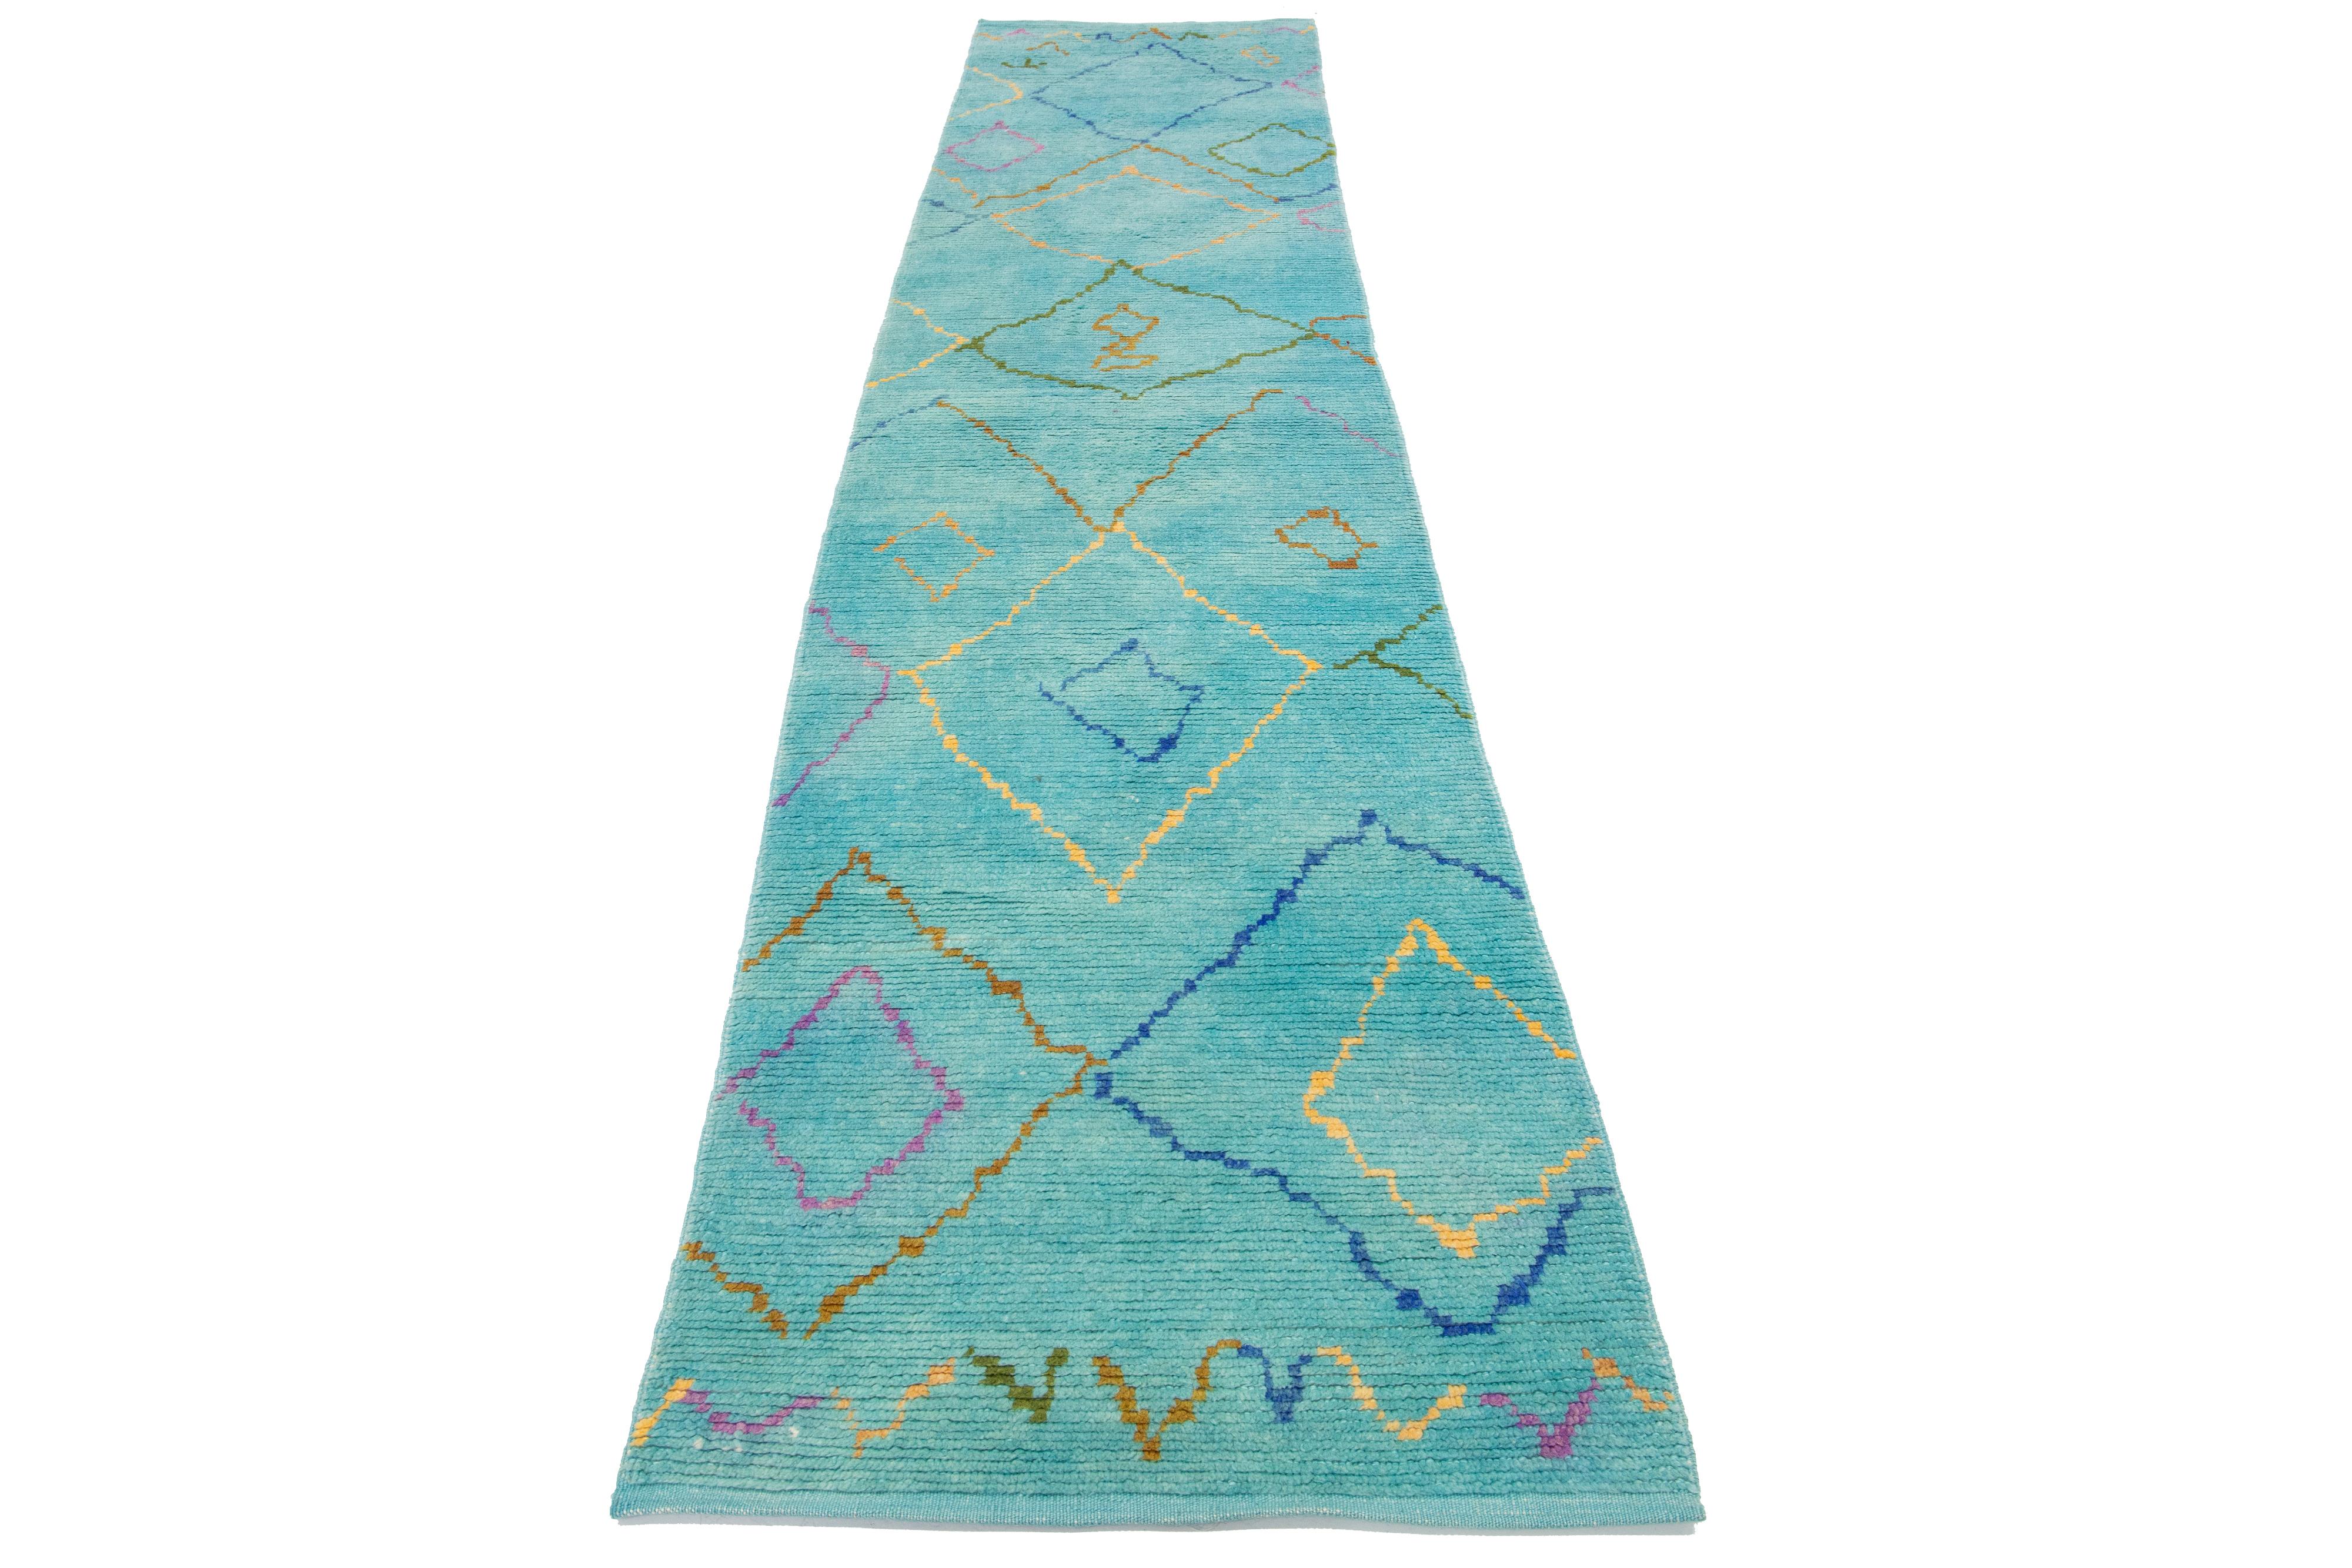 Beautiful Moroccan-style handmade wool rug with a teal field. This Modern rug has multicolor accents featuring a gorgeous all-over geometric tribal design.

This rug measures 3' x 14'.

Our rugs are professionally cleaned before shipping.